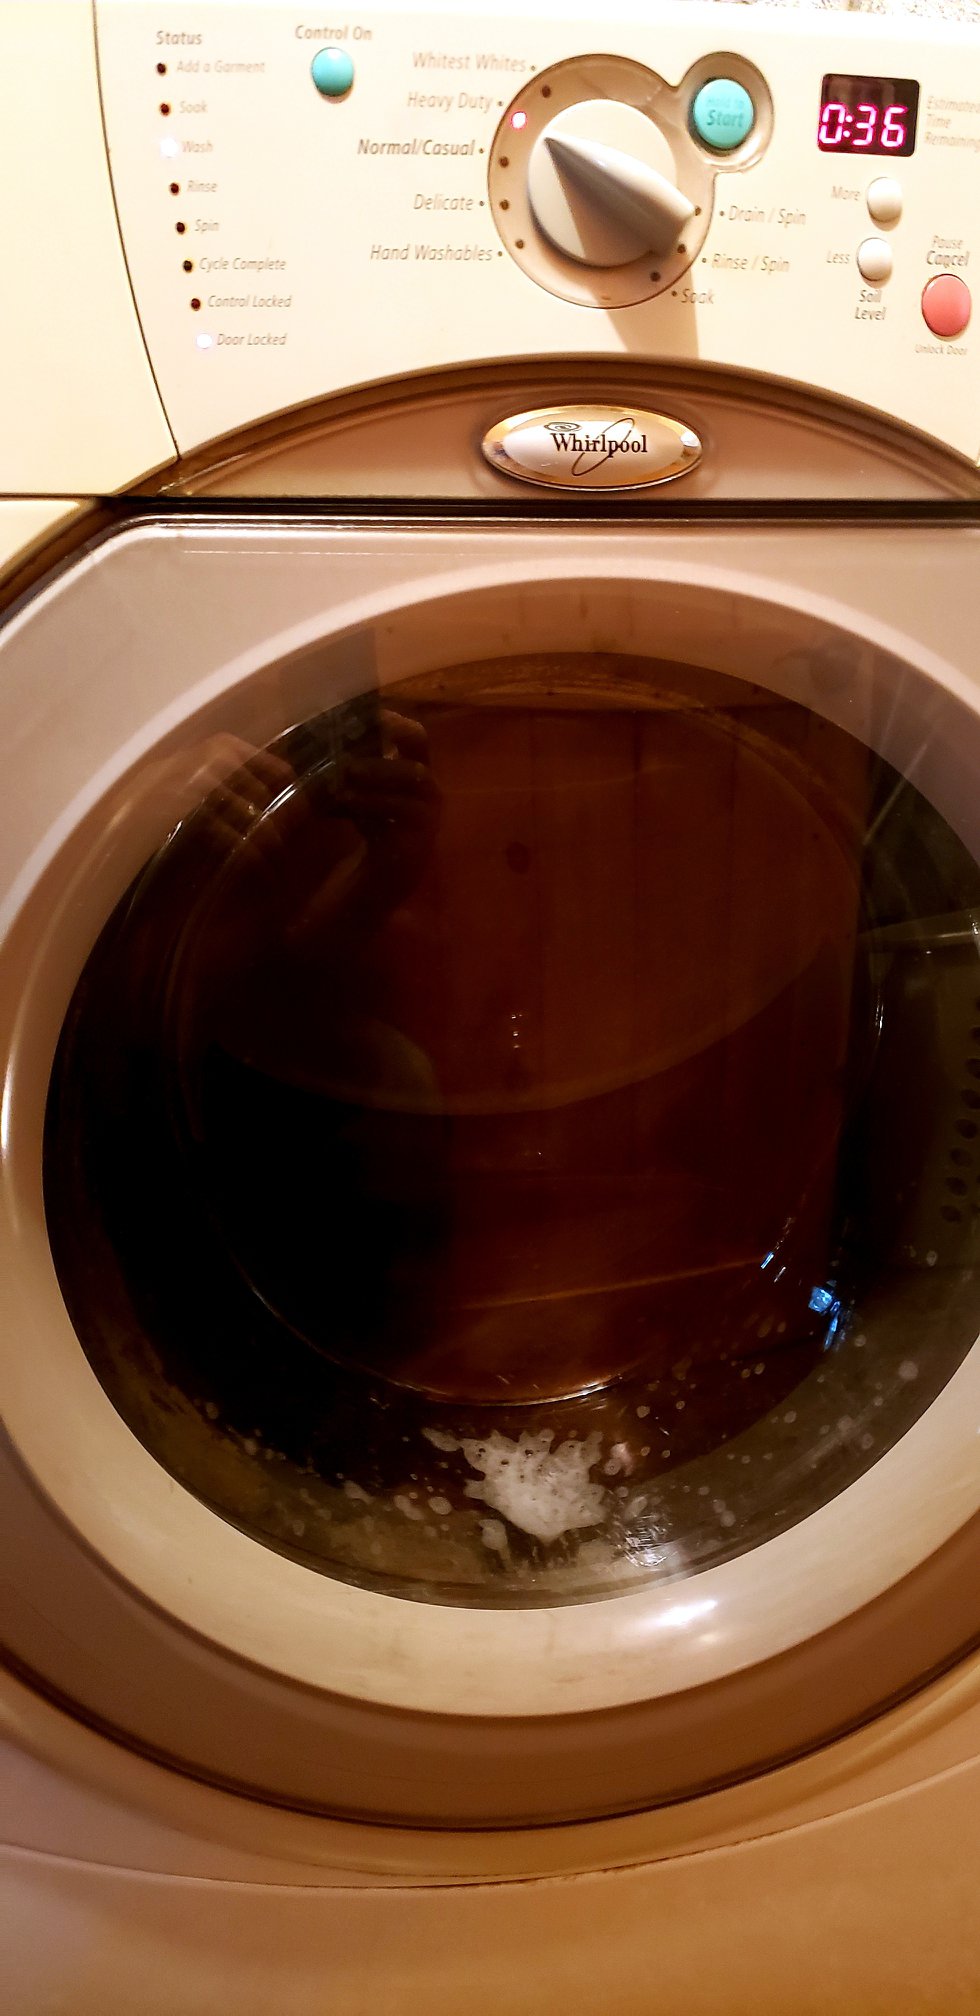 Have you ever watched your clothes through the glass door of your wash machine?